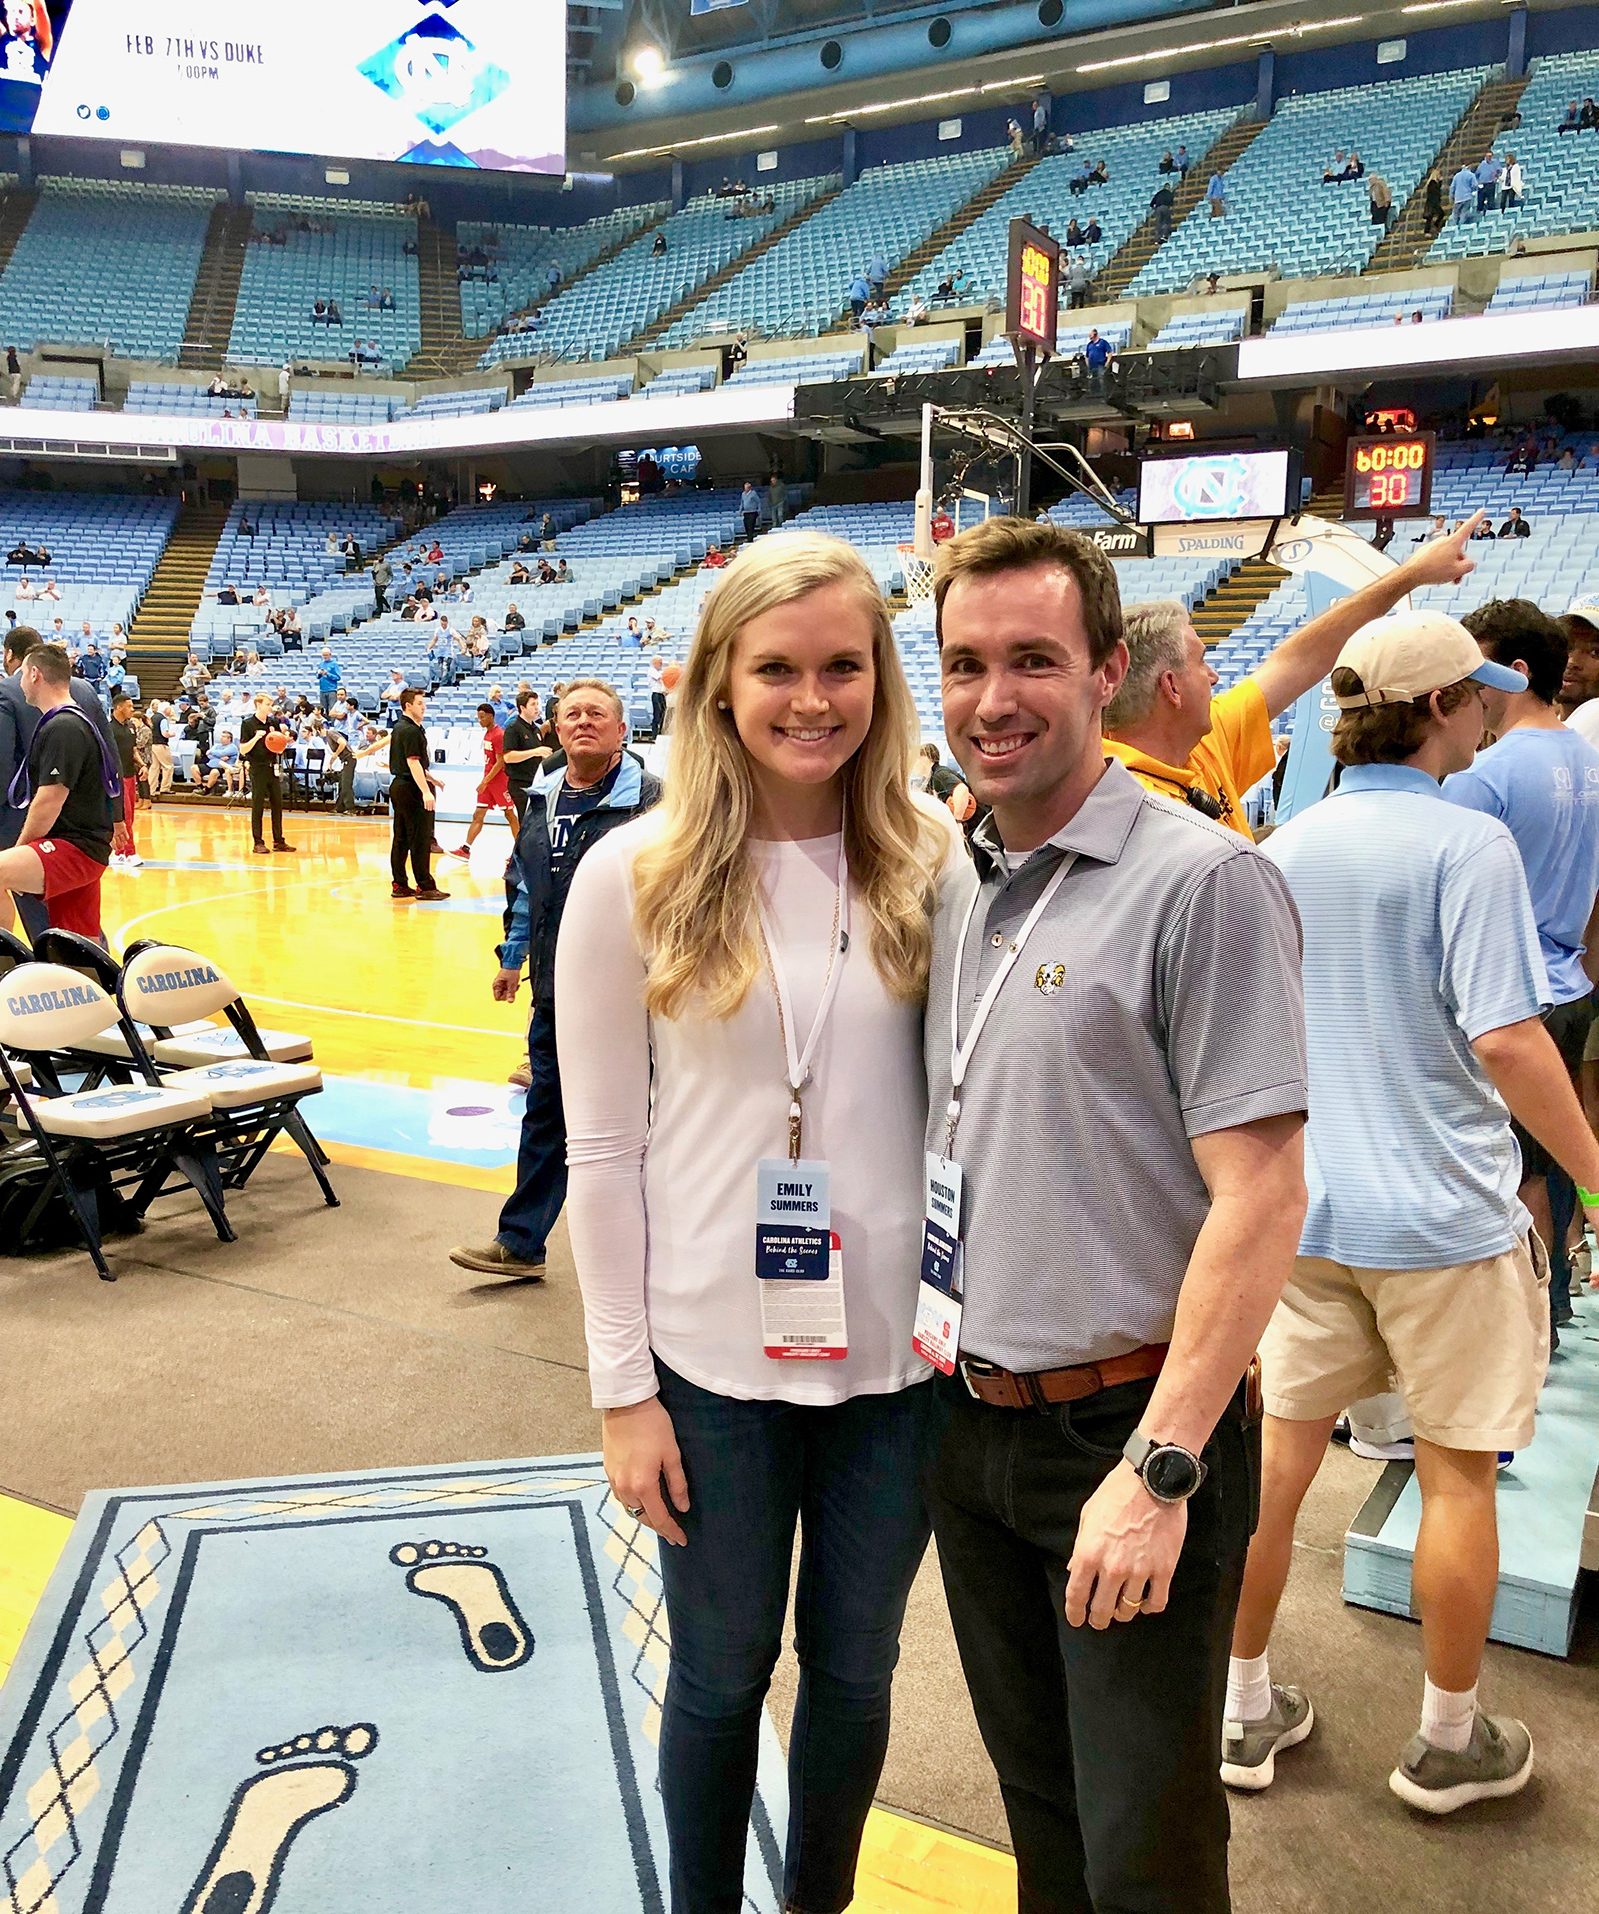 Houston Summers and a friend at the Dean Dome for a basketball game.